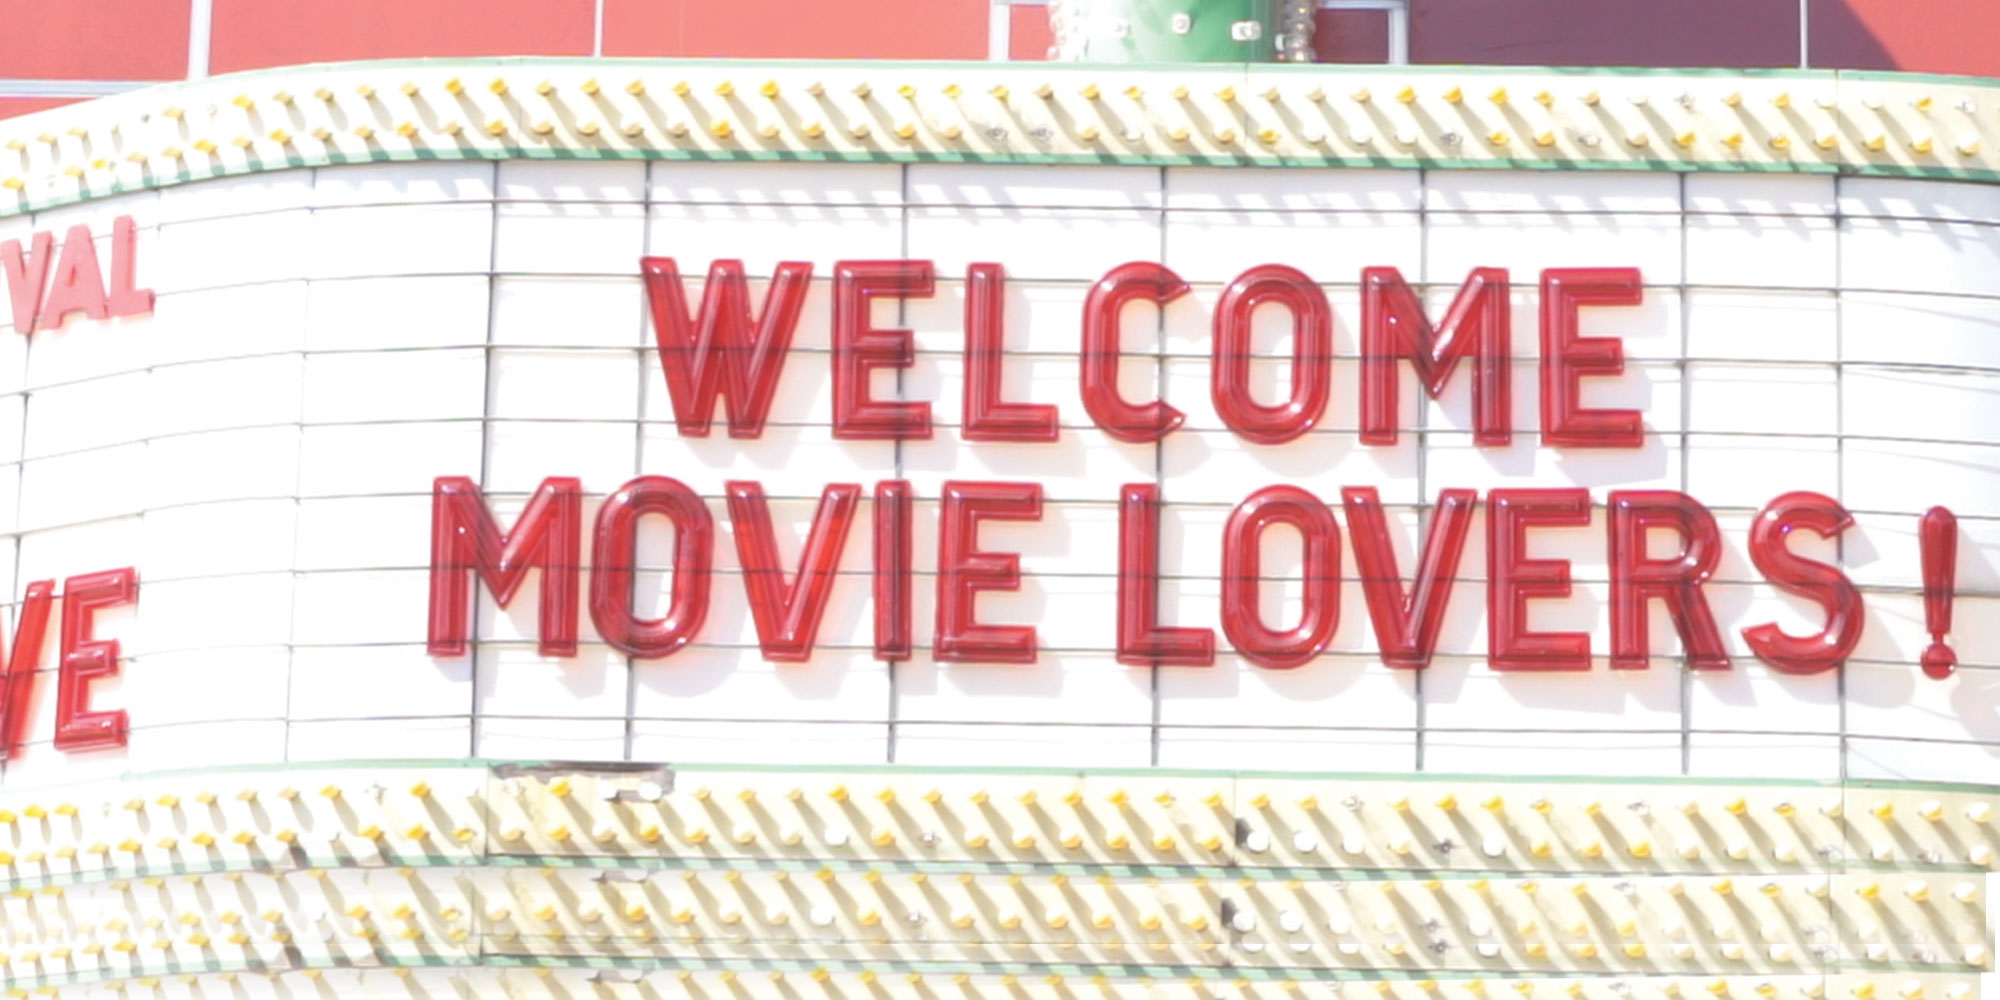 close-up of a picture of a movie theatre display that says 'Welcome movie lovers!'